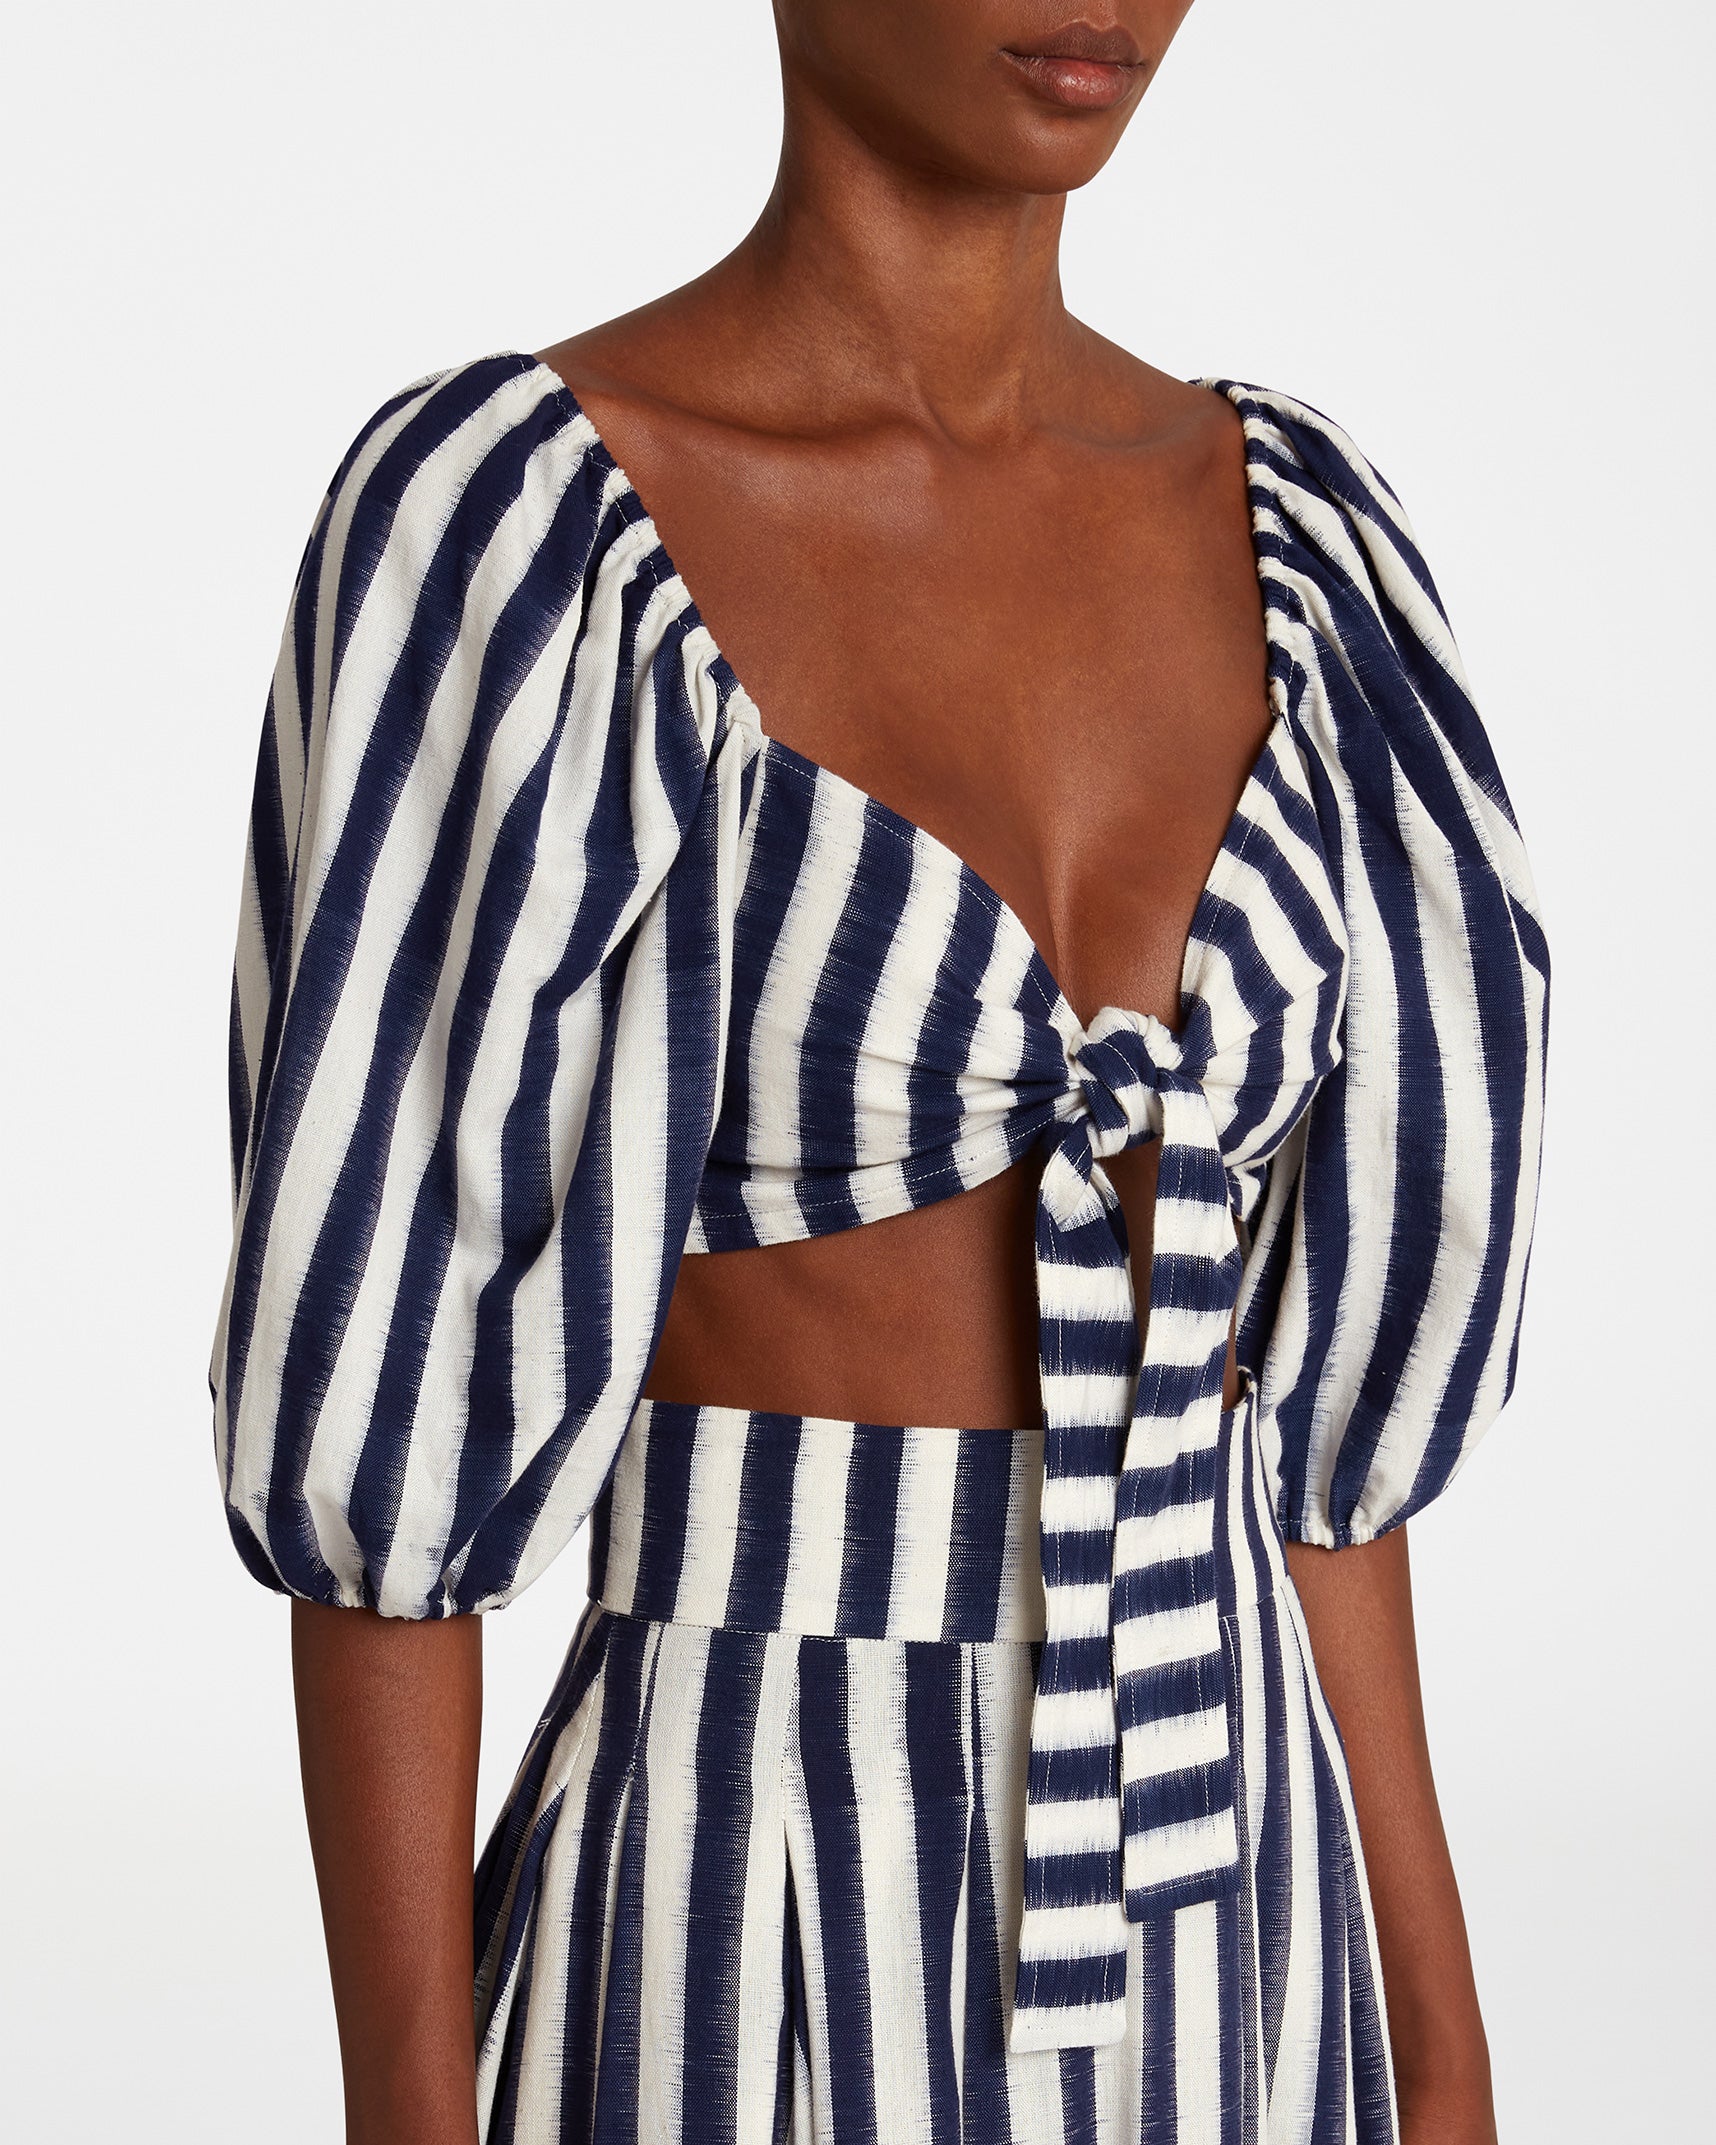 Thaia Top In Ikat Stripes